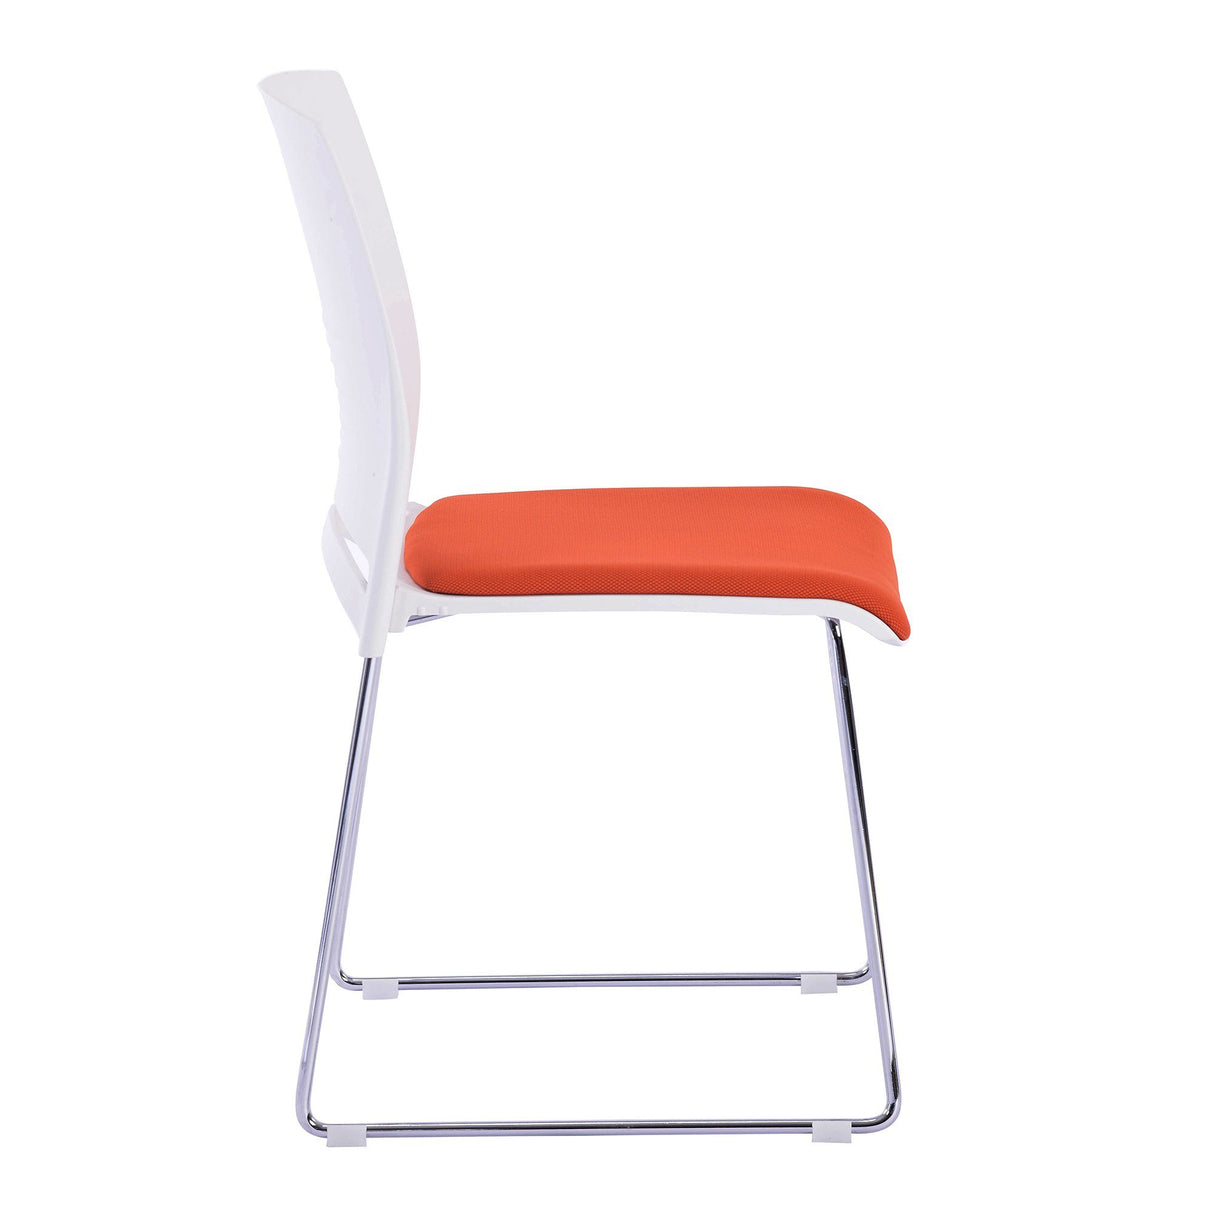 Nautilus Designs Kore Stylish Stackable Chrome Frame Chair with Padded Upholstered Seat, White Shell and Hand Hole in Backrest - 2 per Box -Orange